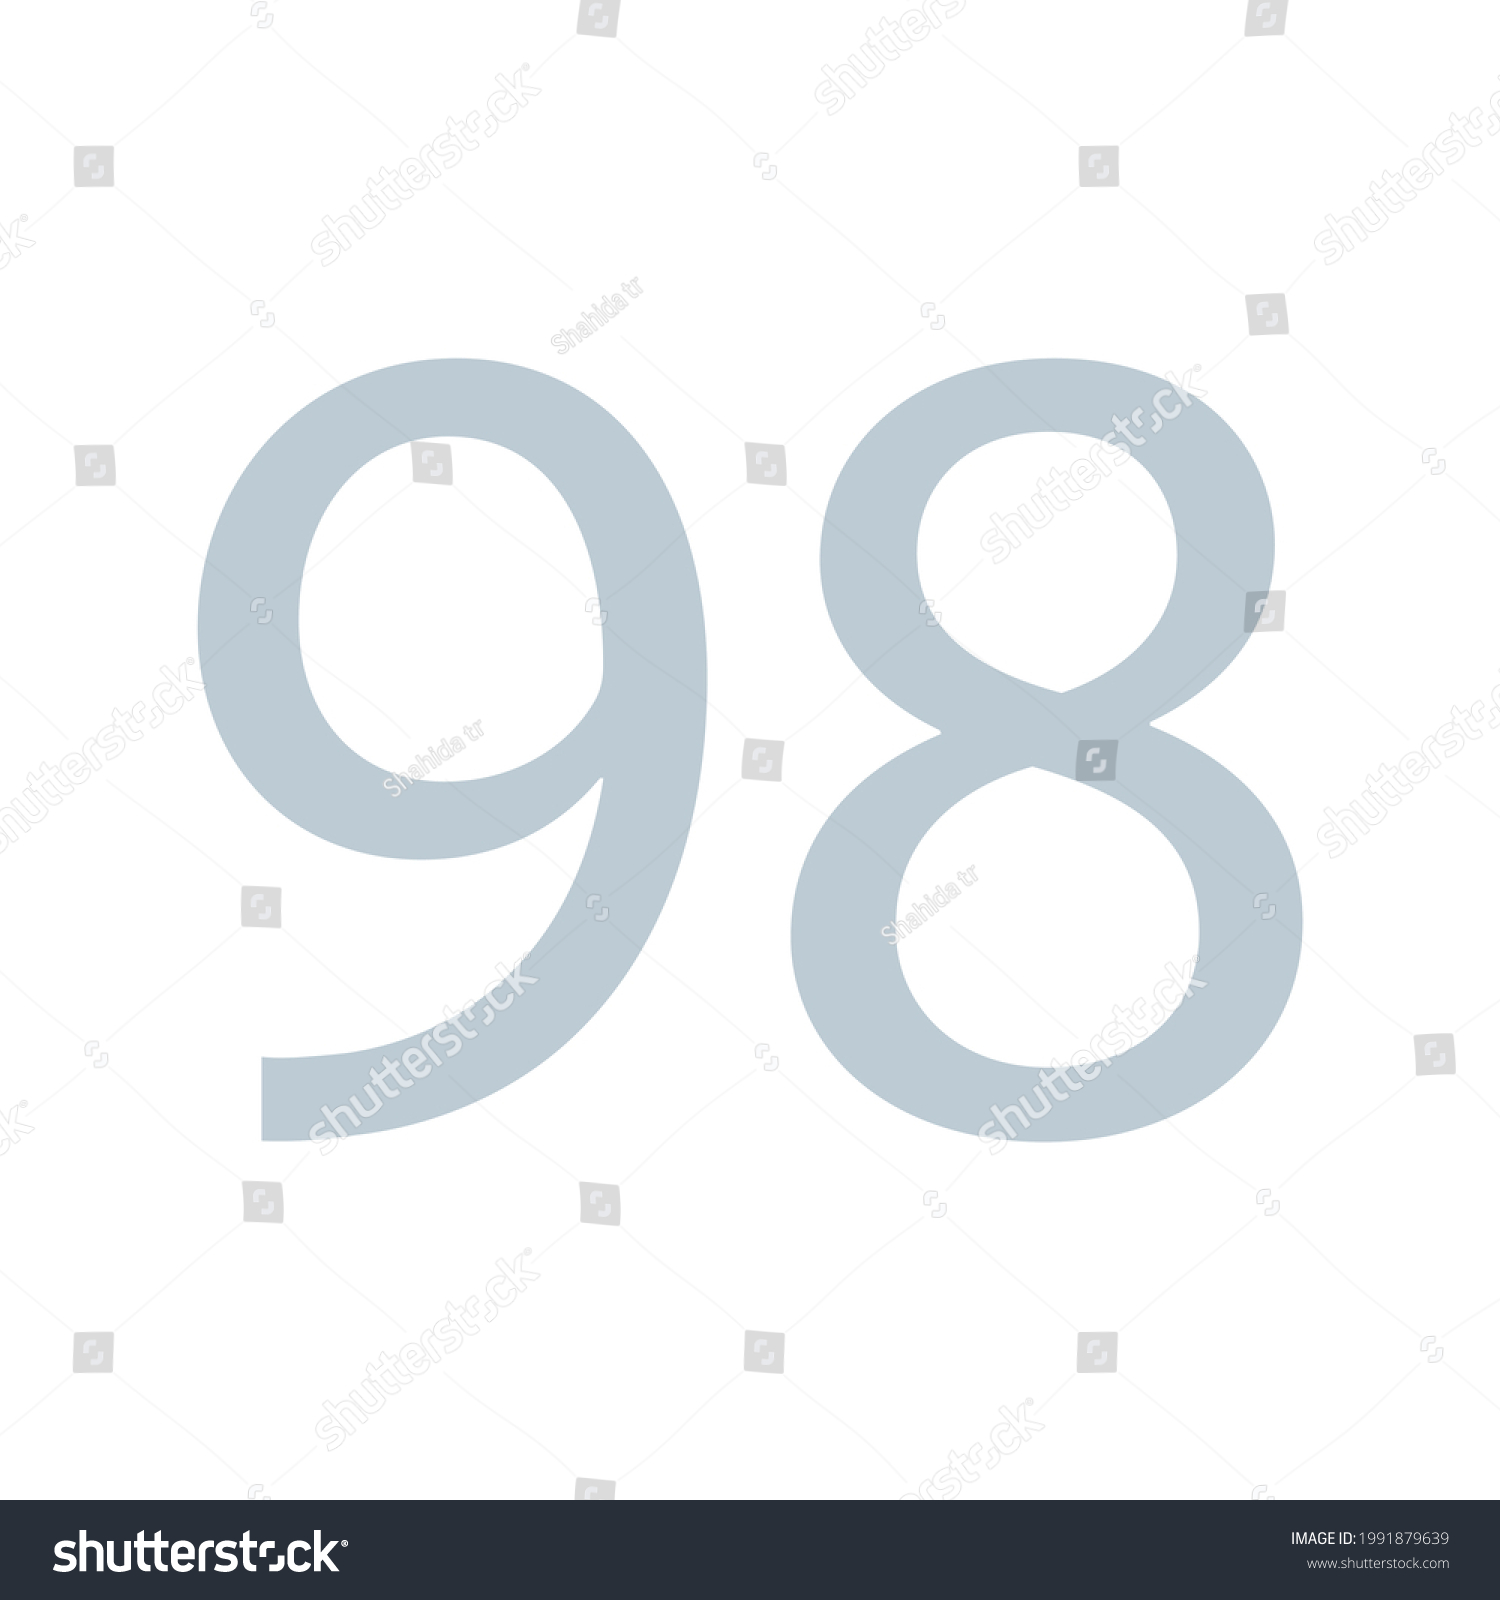 98 Number Simple Clip Art Vector Stock Vector (Royalty Free) 1991879639